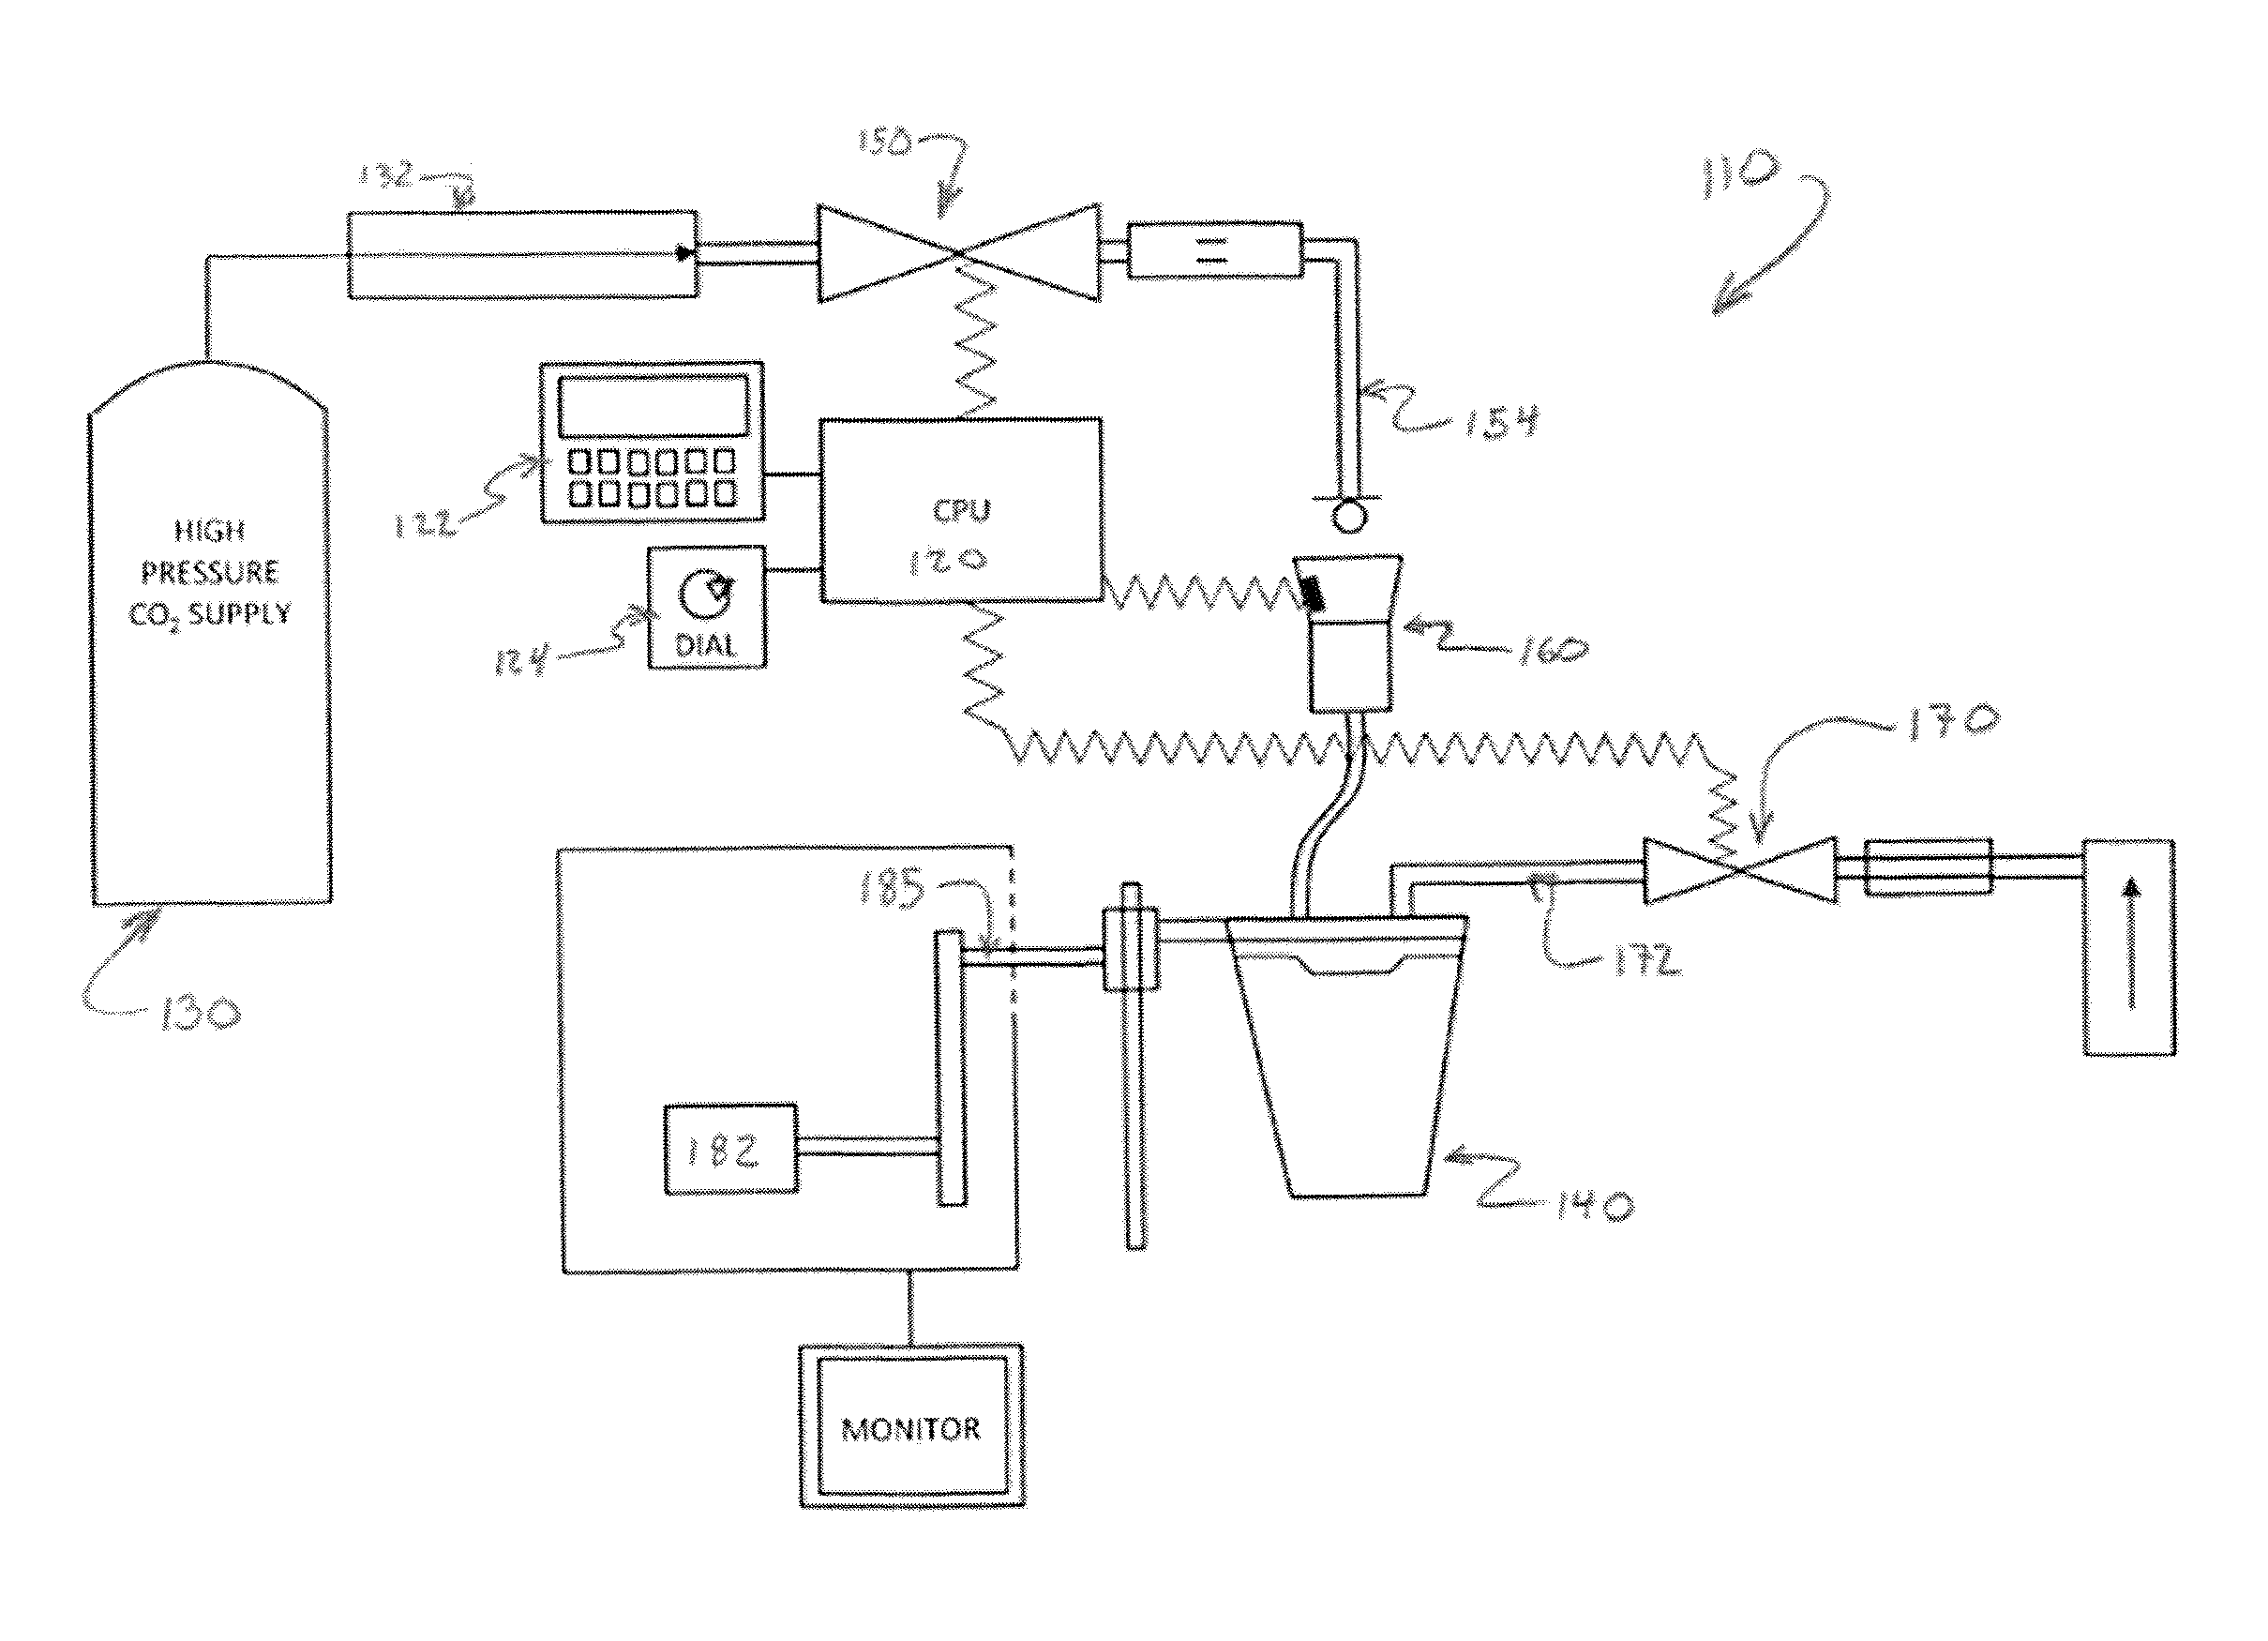 Method for customizing a beverage's carbonation level